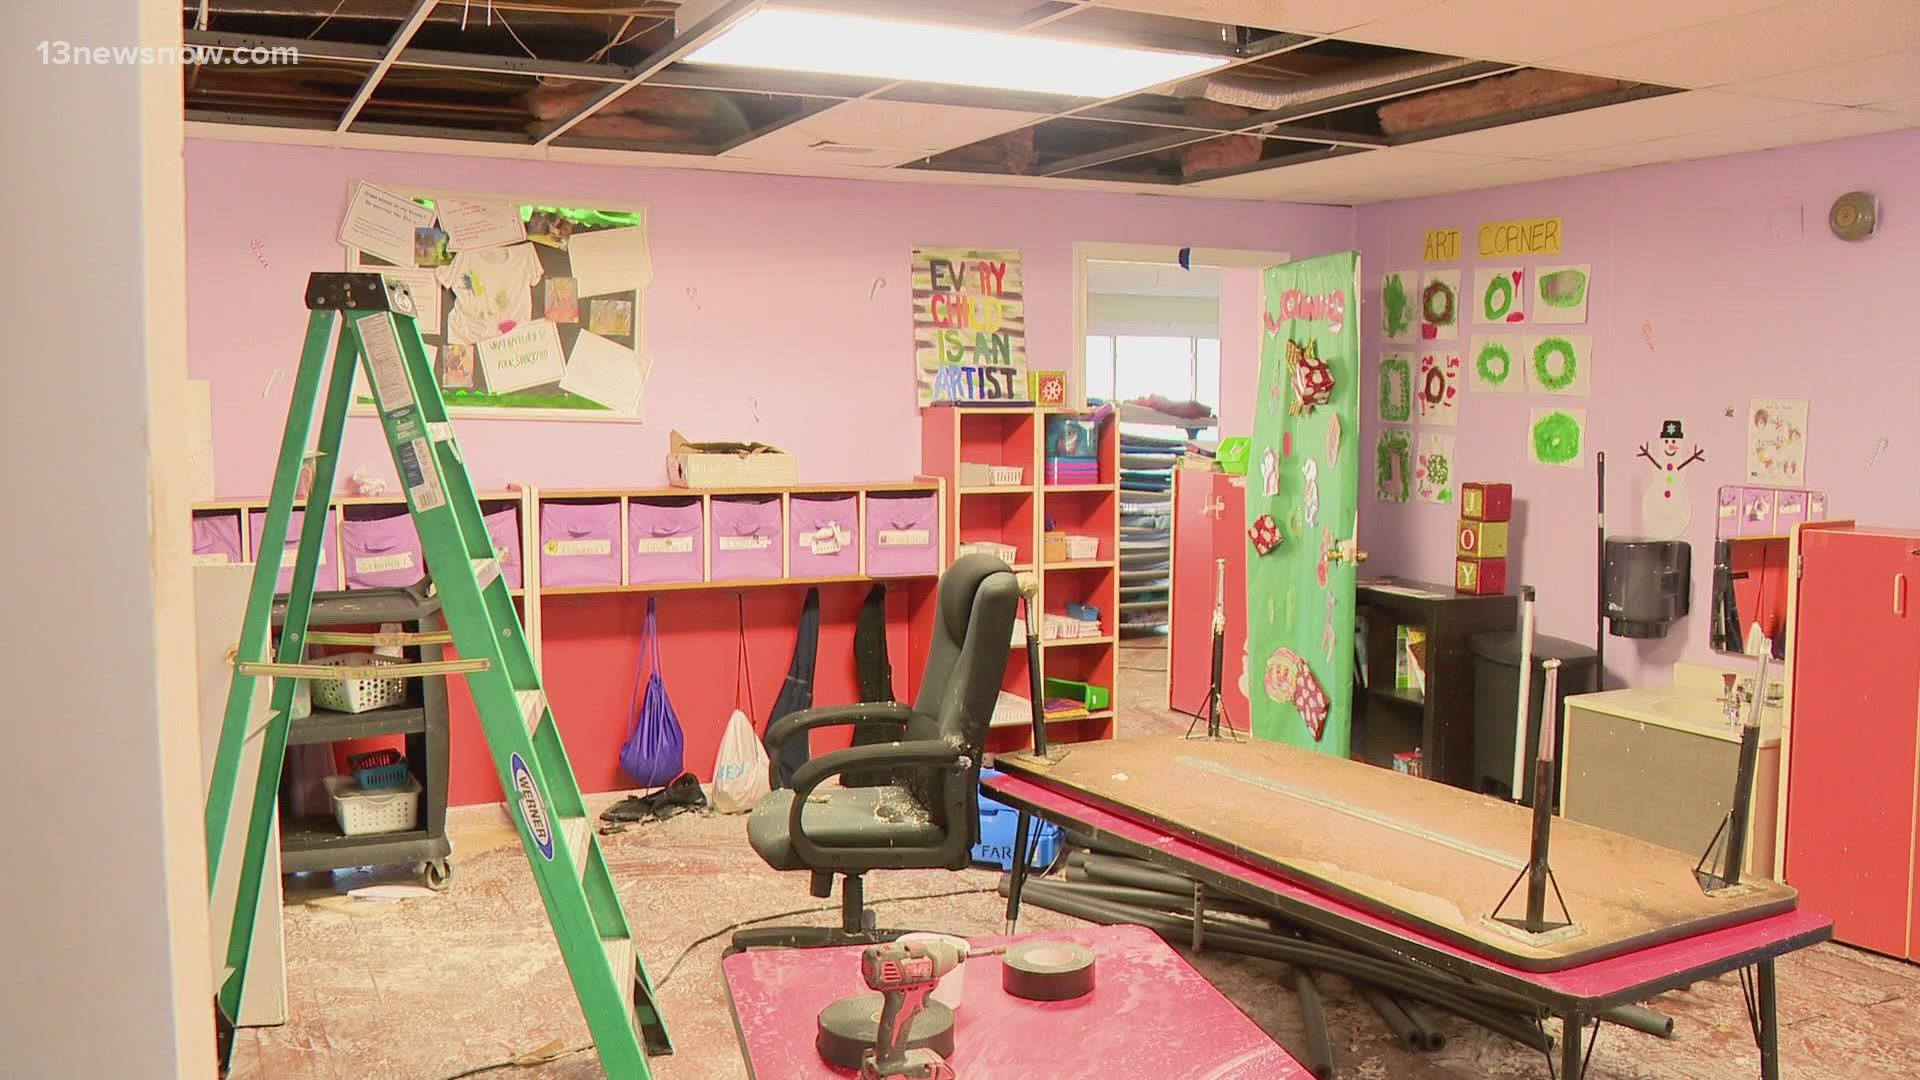 A pipe burst at Brilliant Beginnings Learning Center in Virginia Beach and now the daycare is closed to undergo repairs.